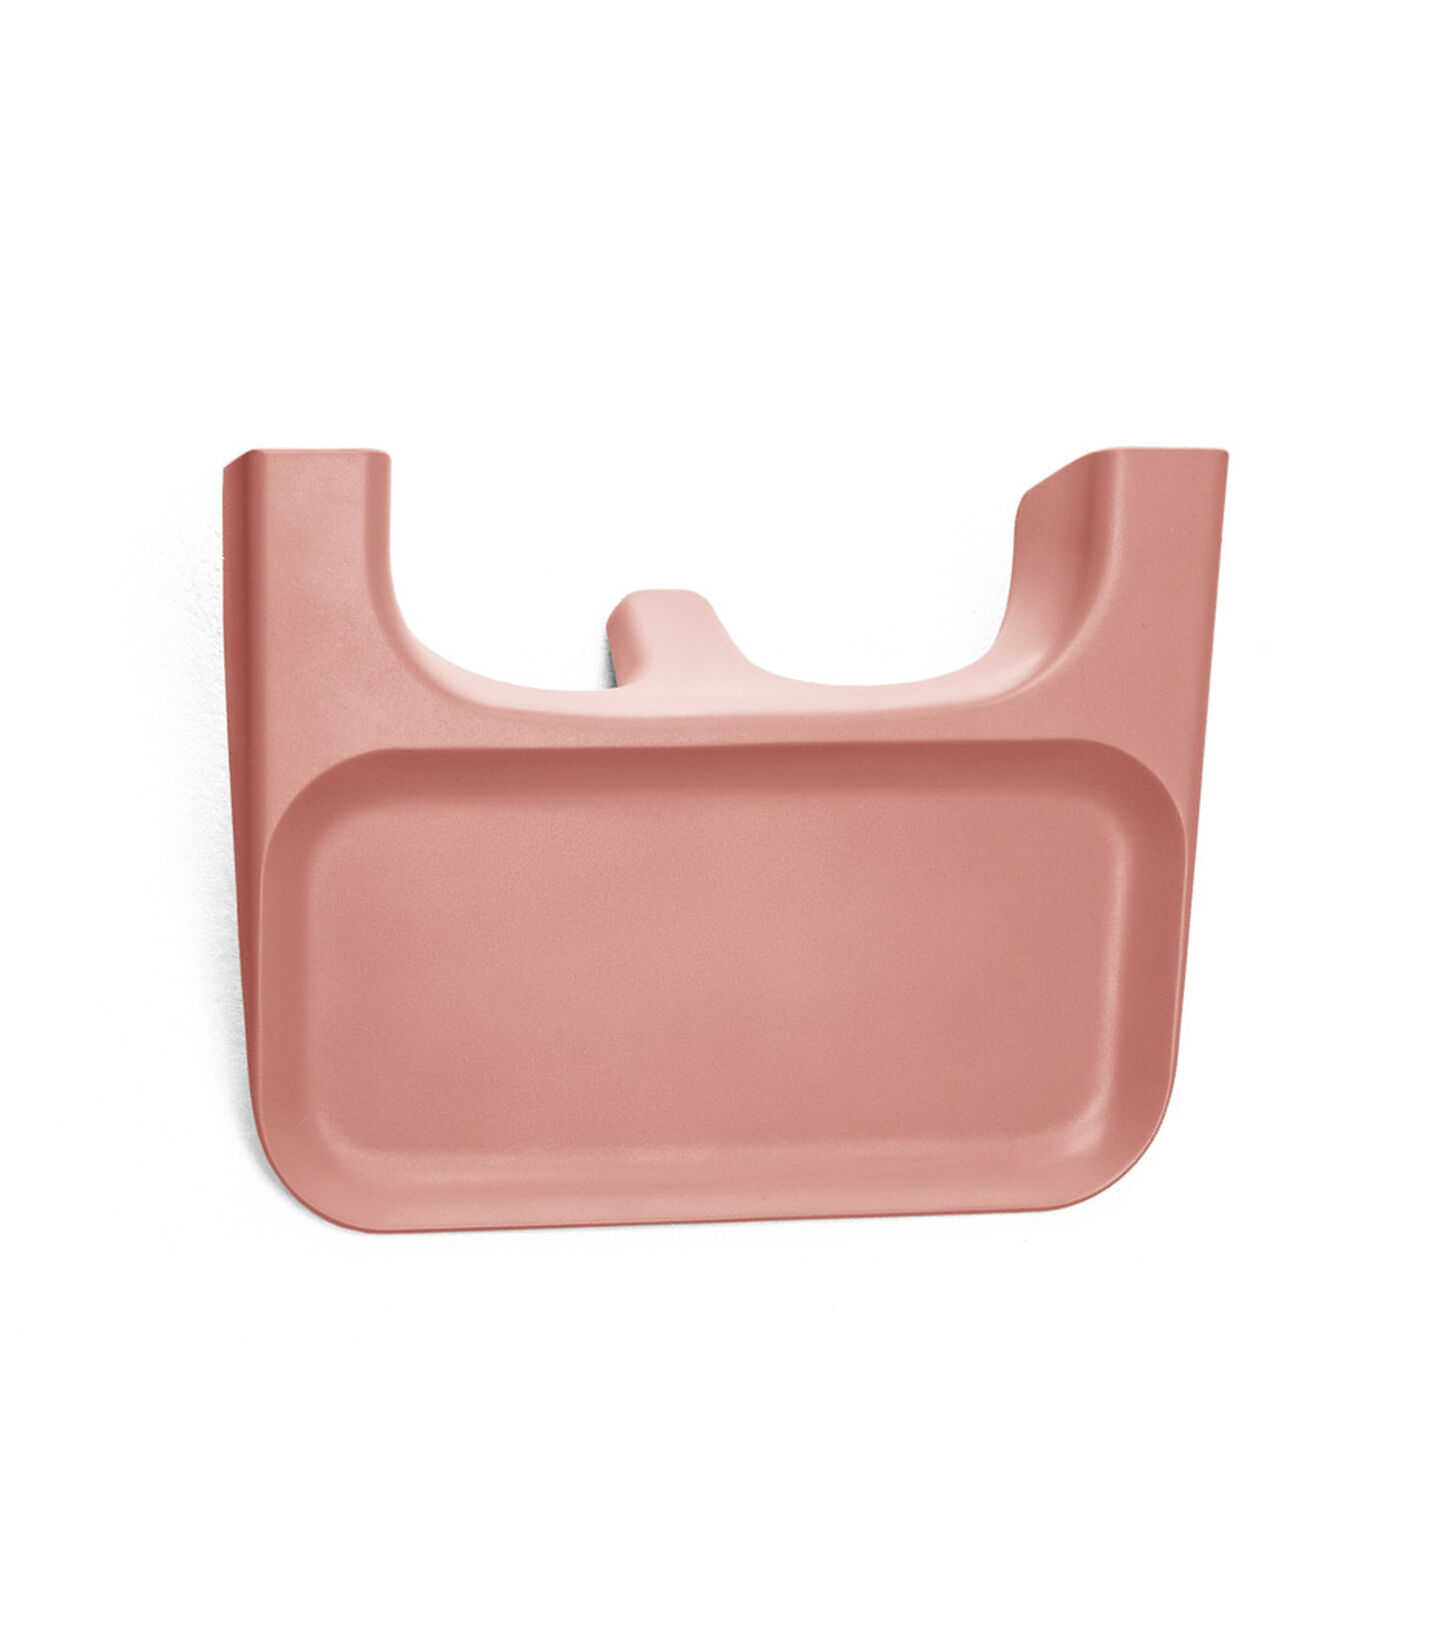 Stokke® Clikk™ Tray - Sunny Coral, Sunny Coral, mainview view 1